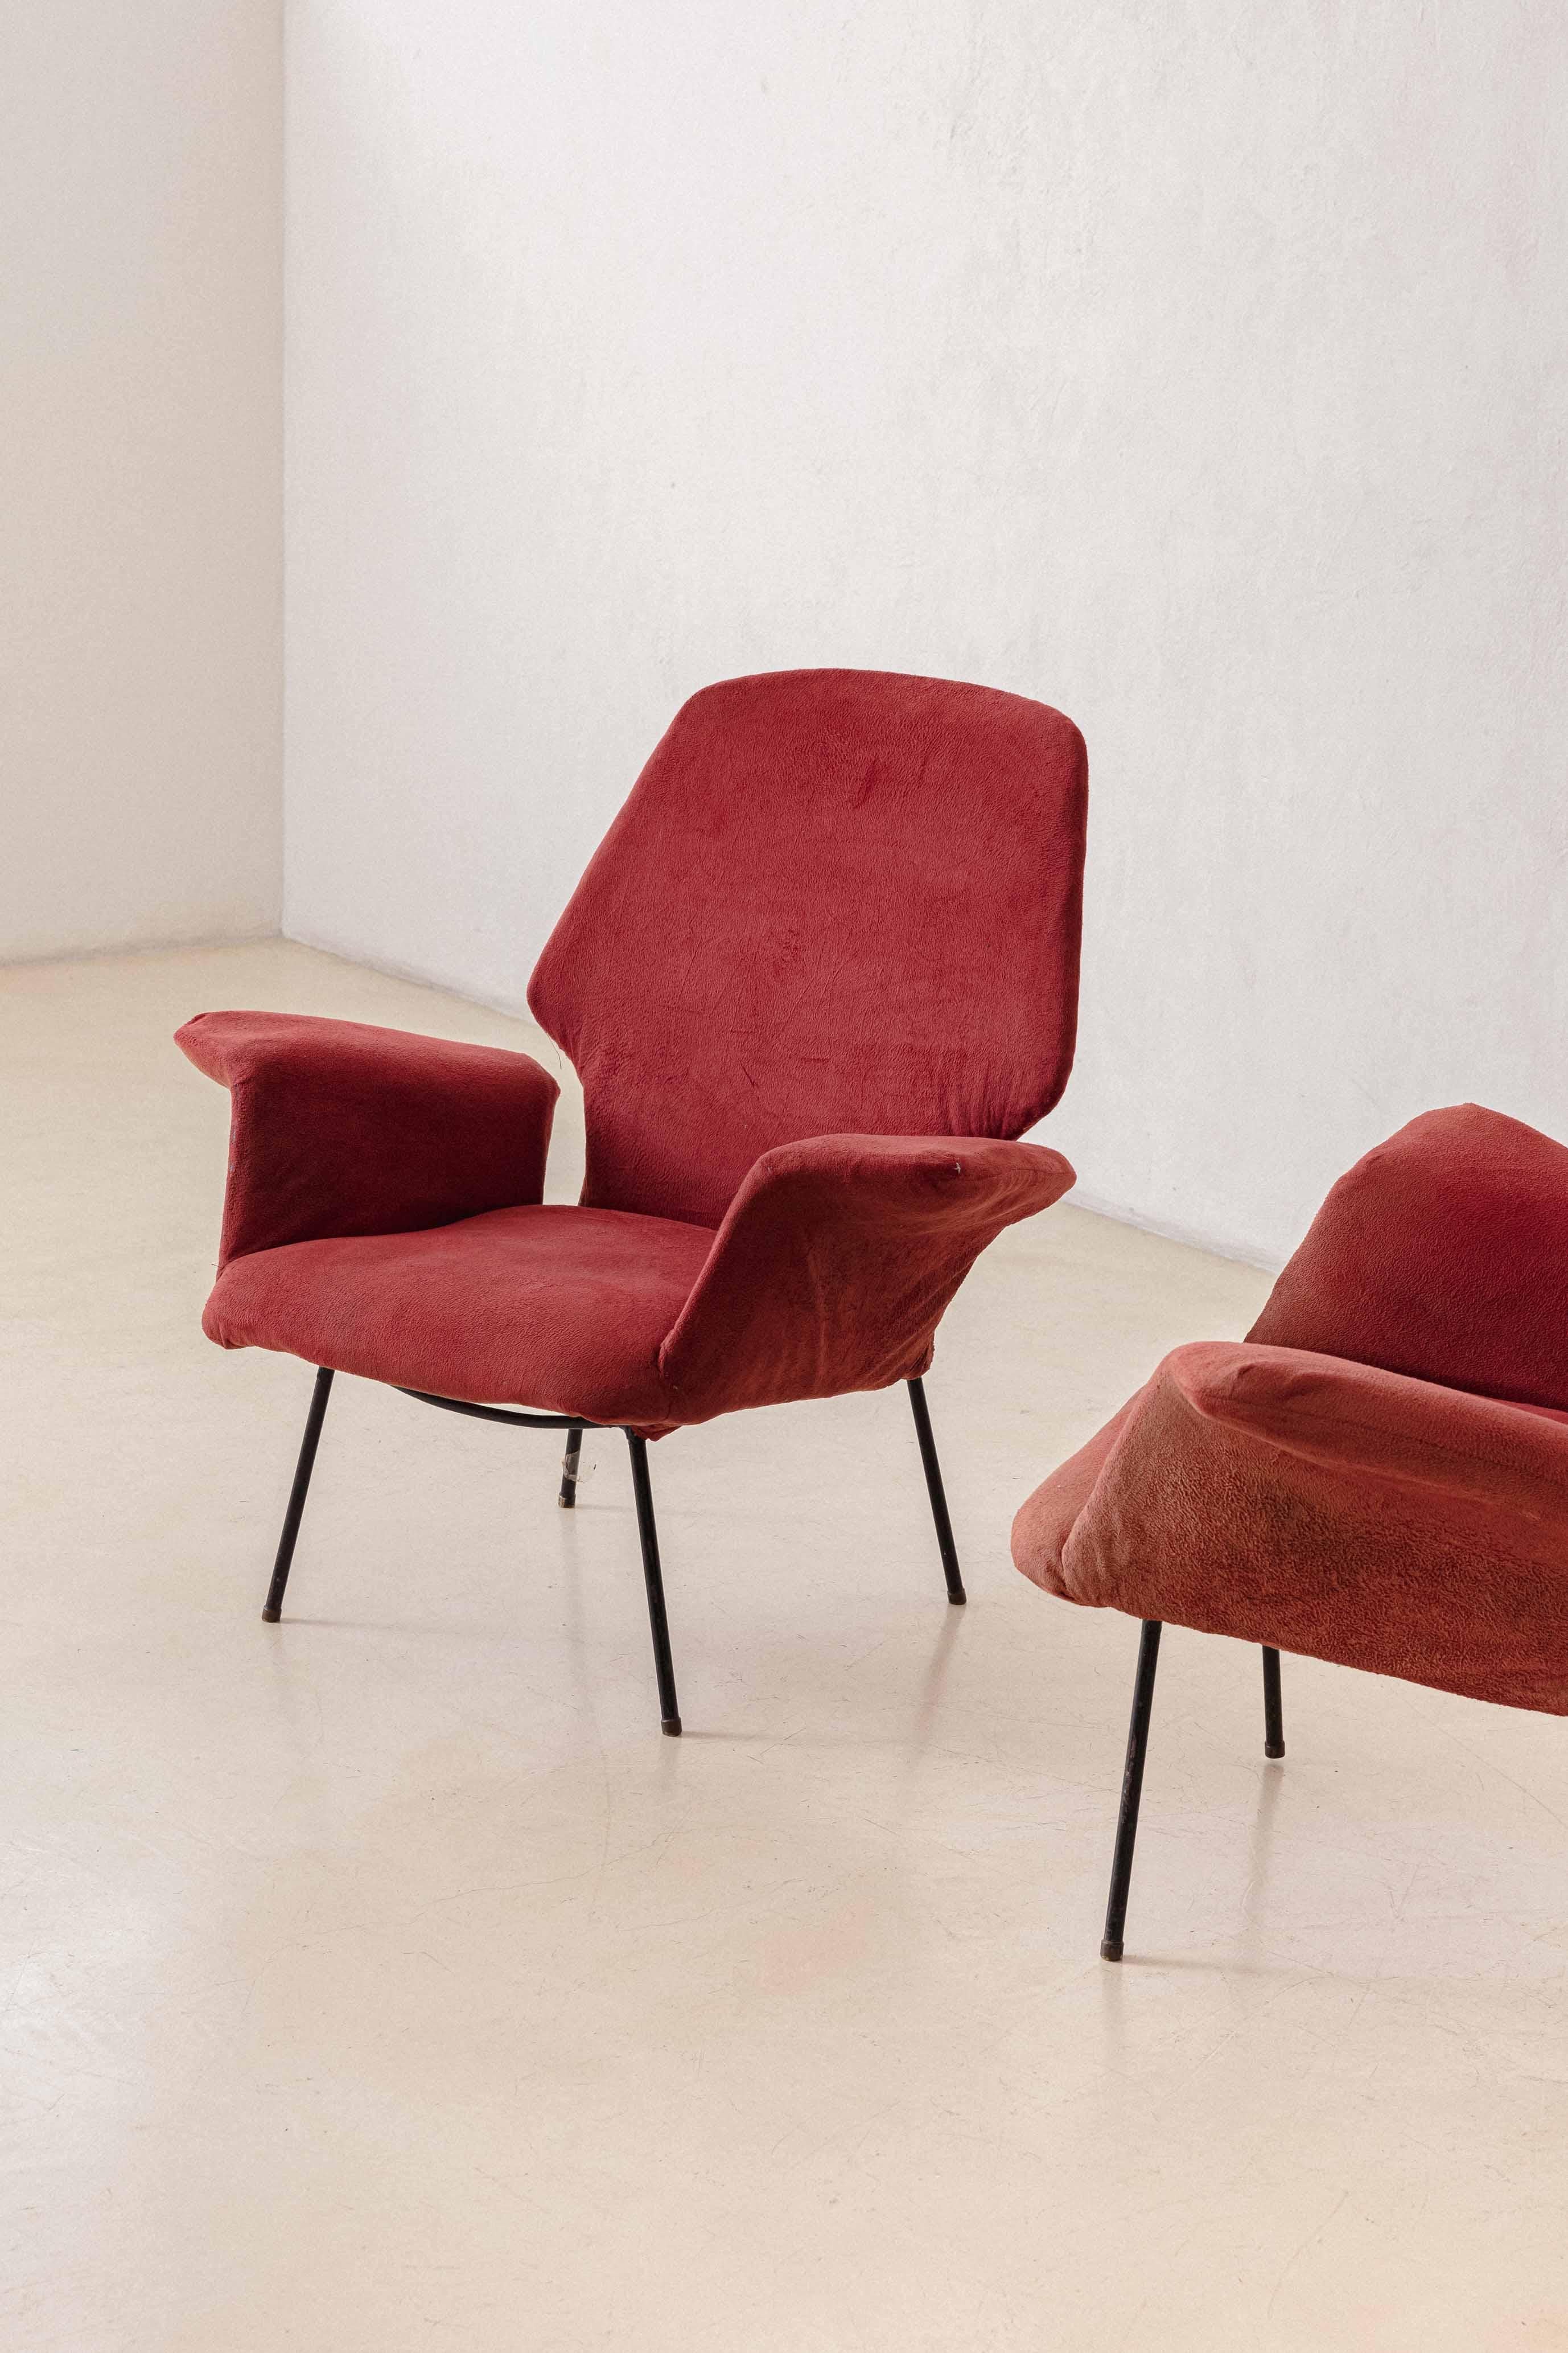 Mid-Century Modern Pair of Armchairs by Carlo Hauner and Martin Eisler, Brazilian Midcentury, 1955 For Sale